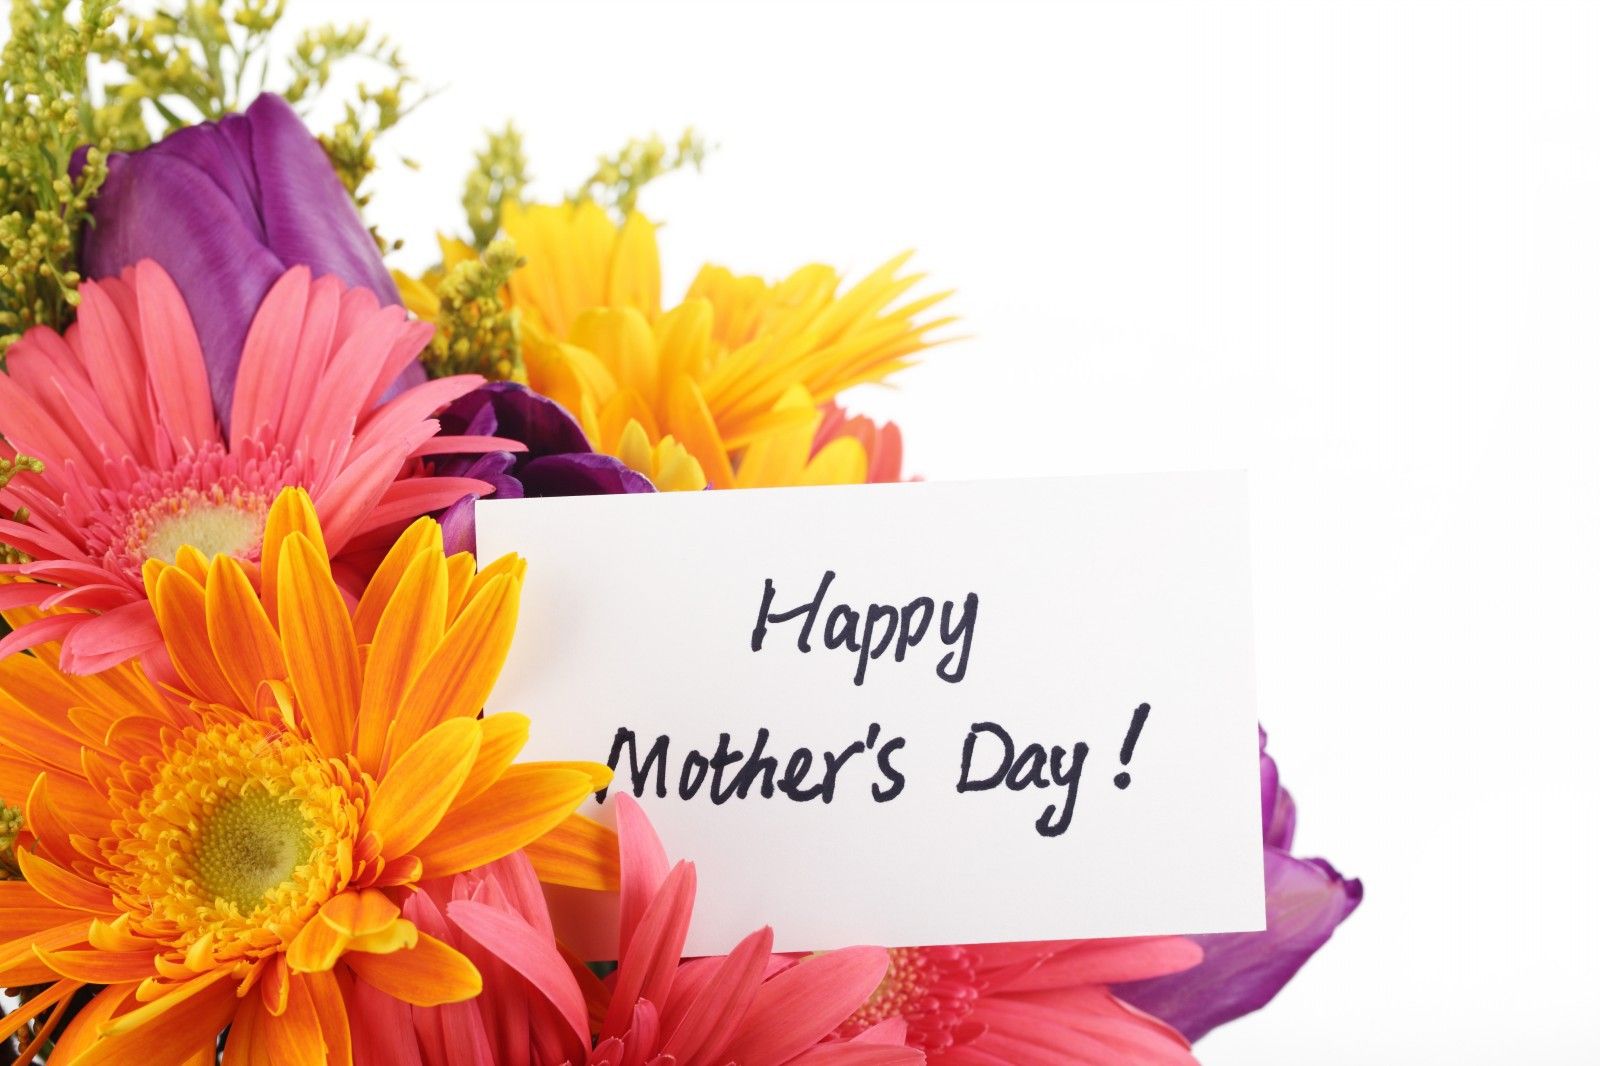 Happy Mothers Day Wallpaper 61222 1600x1066px